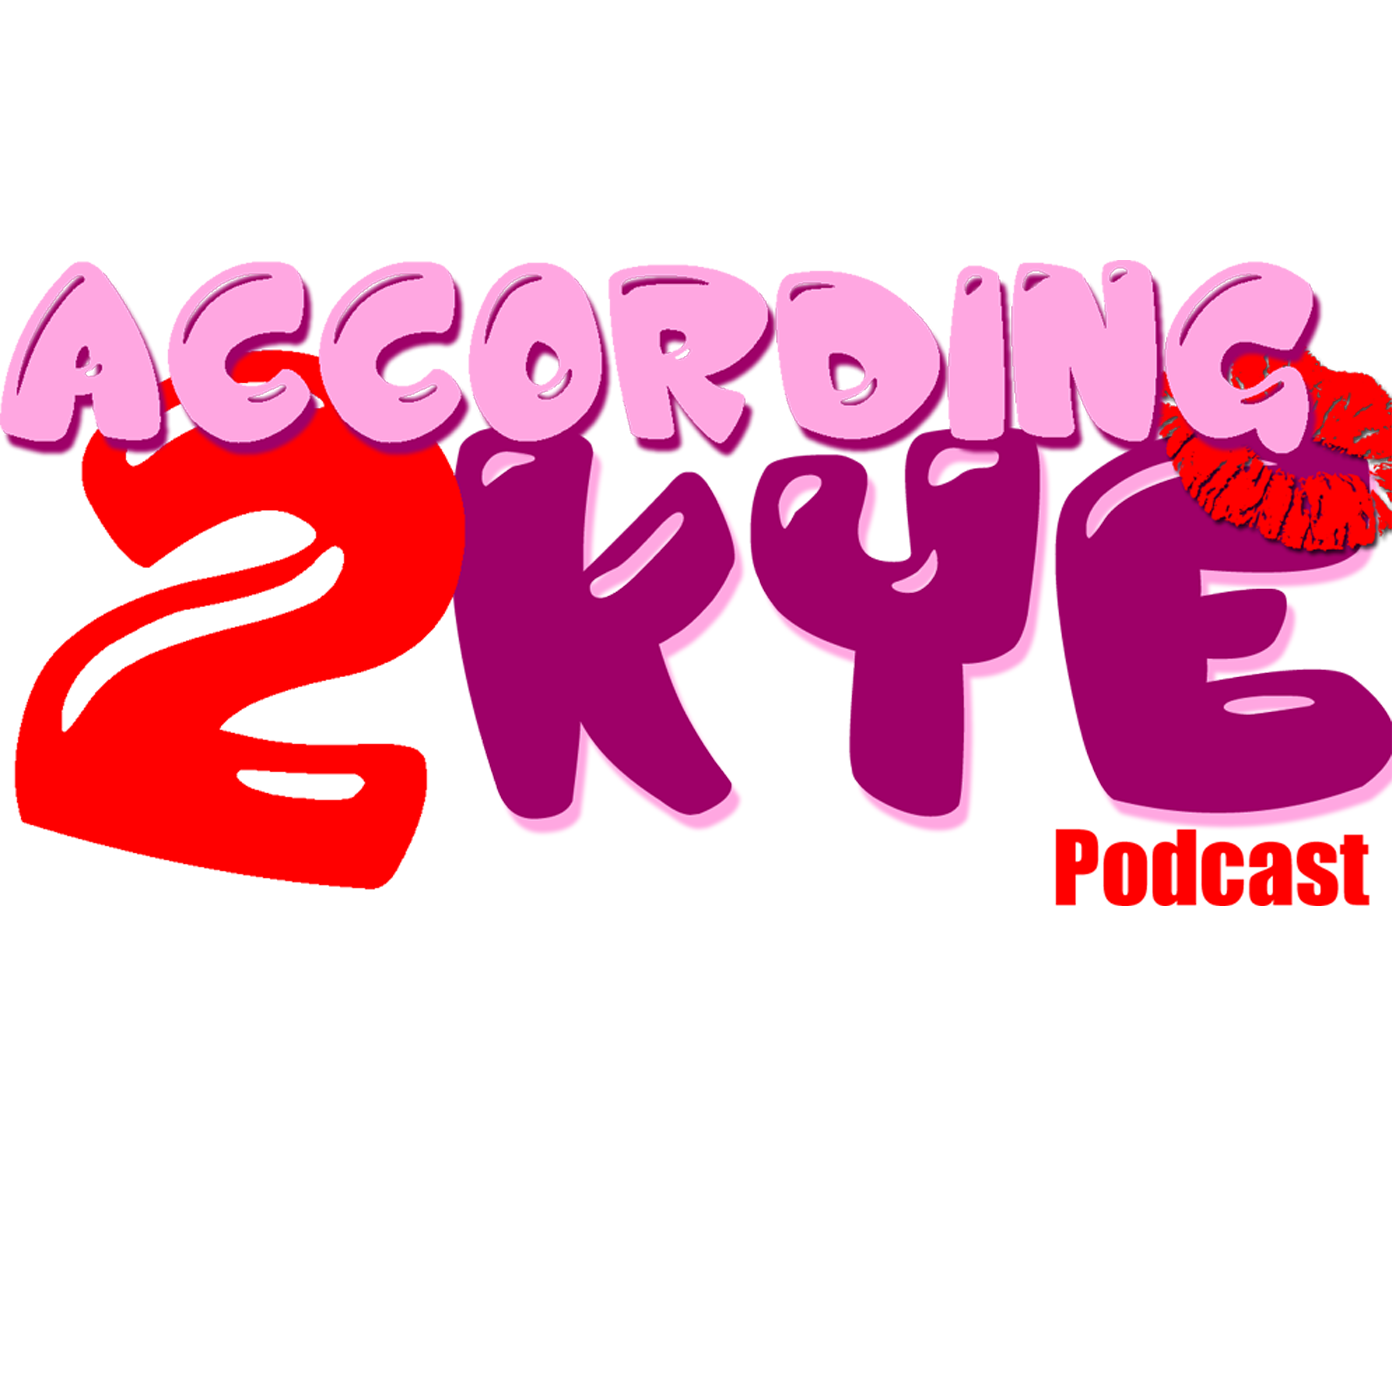 According 2 Kye Podcast – According 2 Stalking Is Sexy